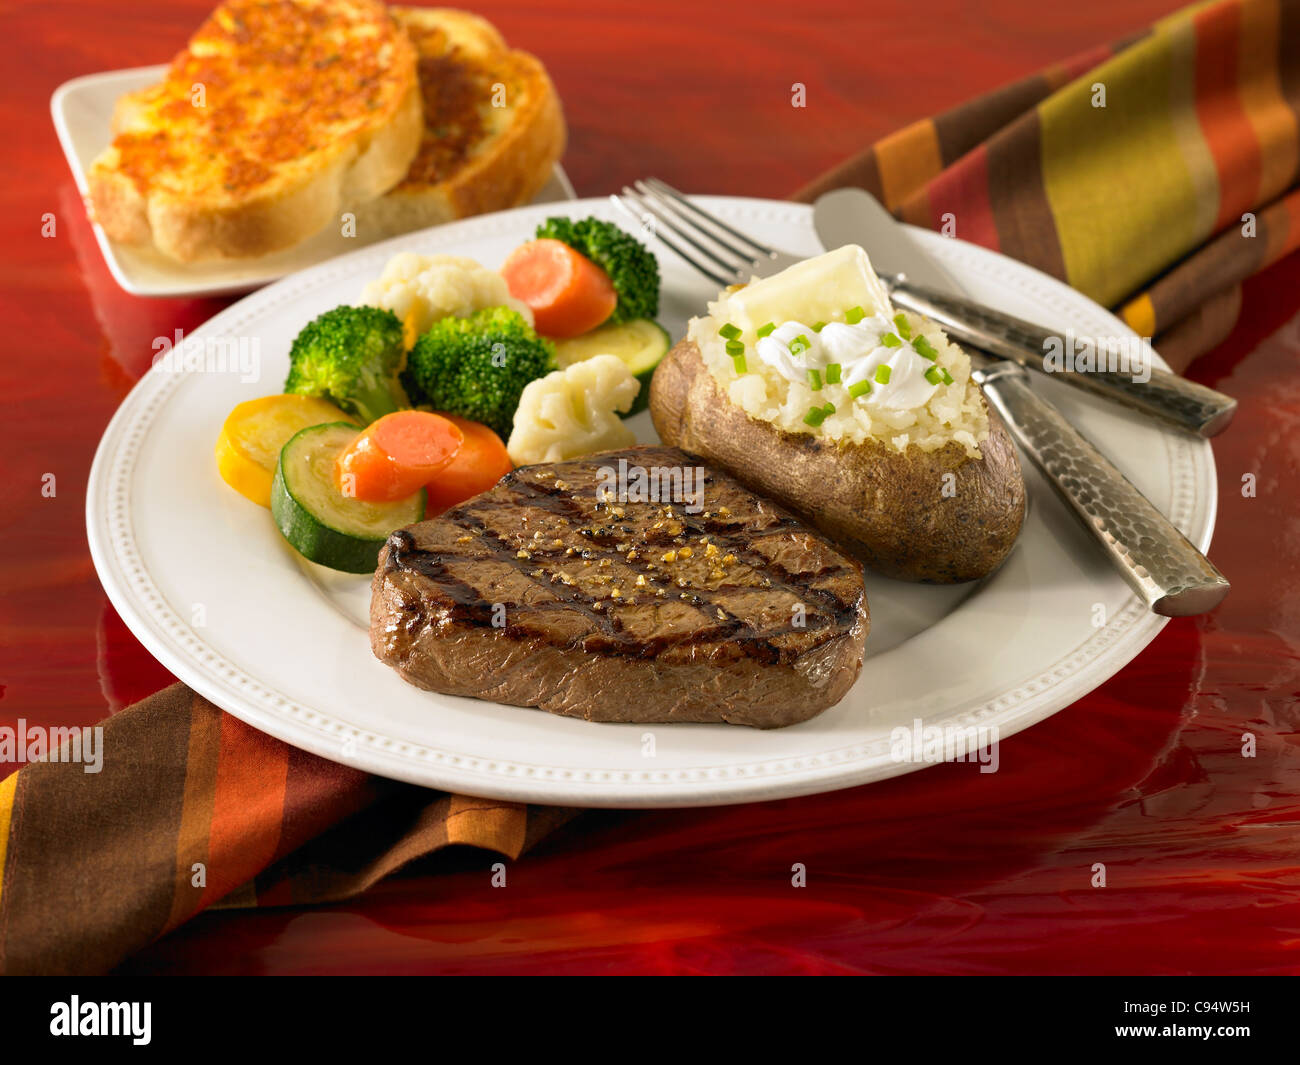 Top Sirloin steak with a loaded baked potato, vegetables and garlic ...